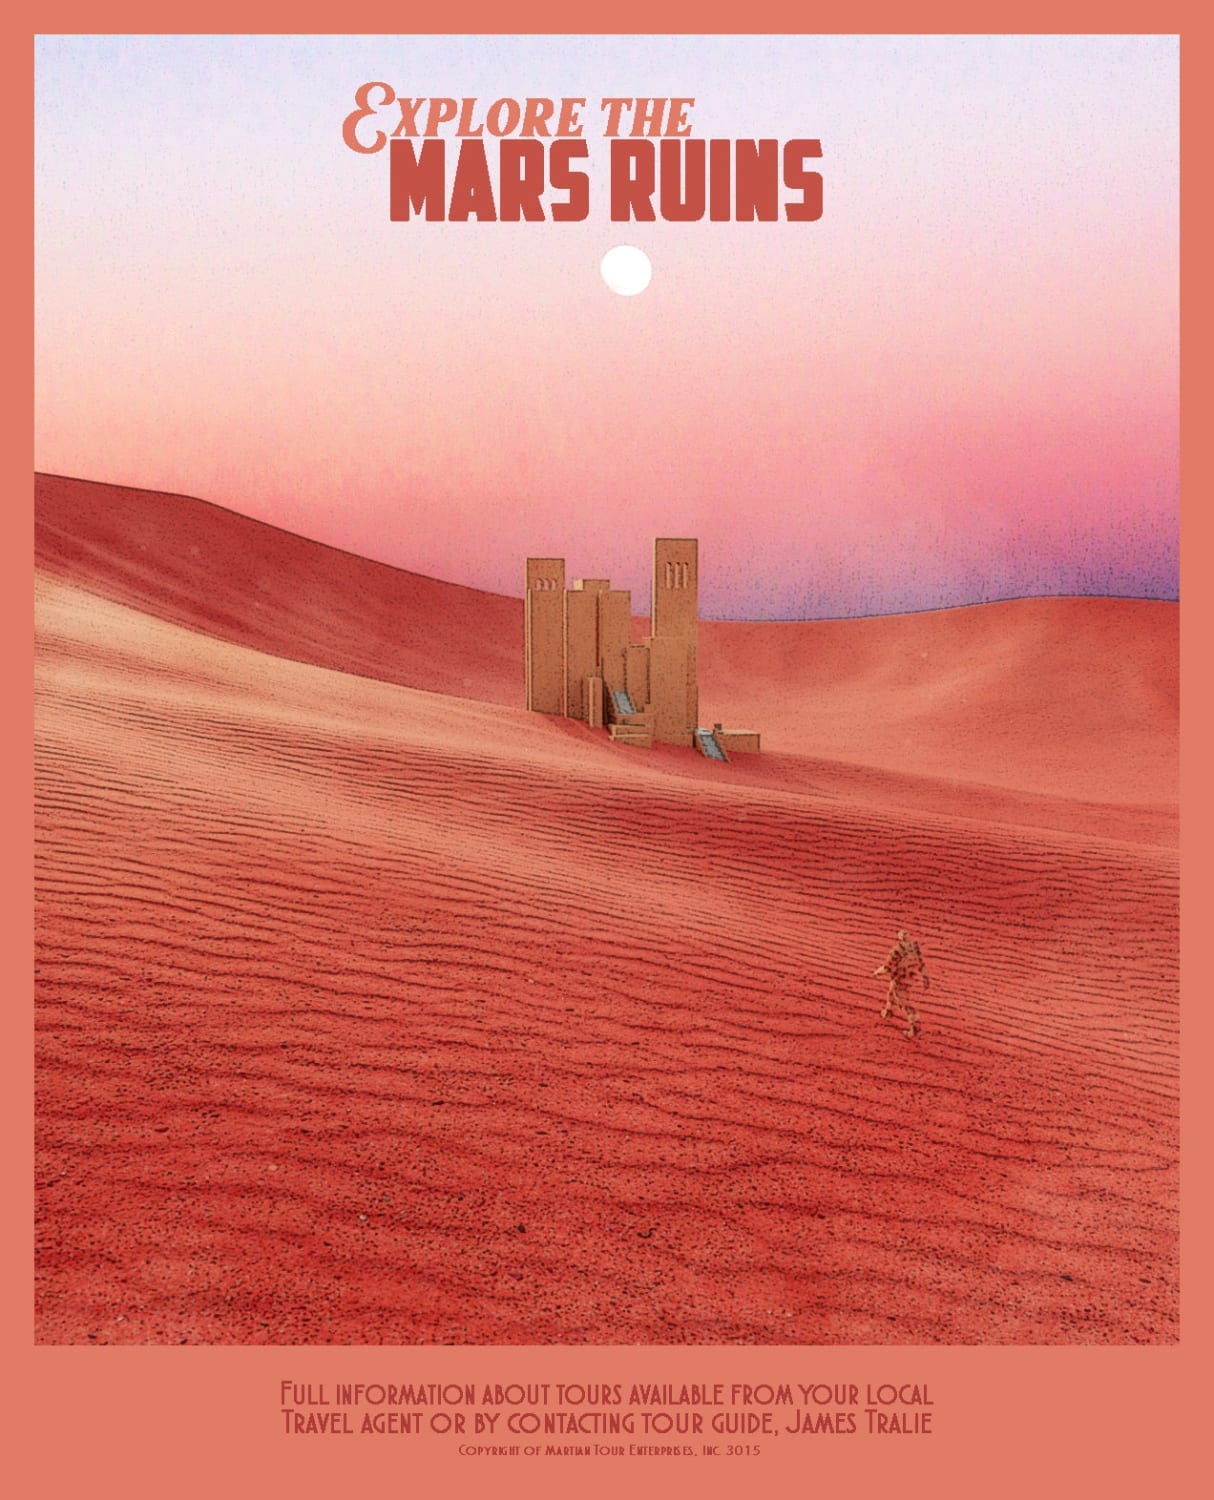 "Explore the Mars Ruins" - the second poster design in my space vintage travel series